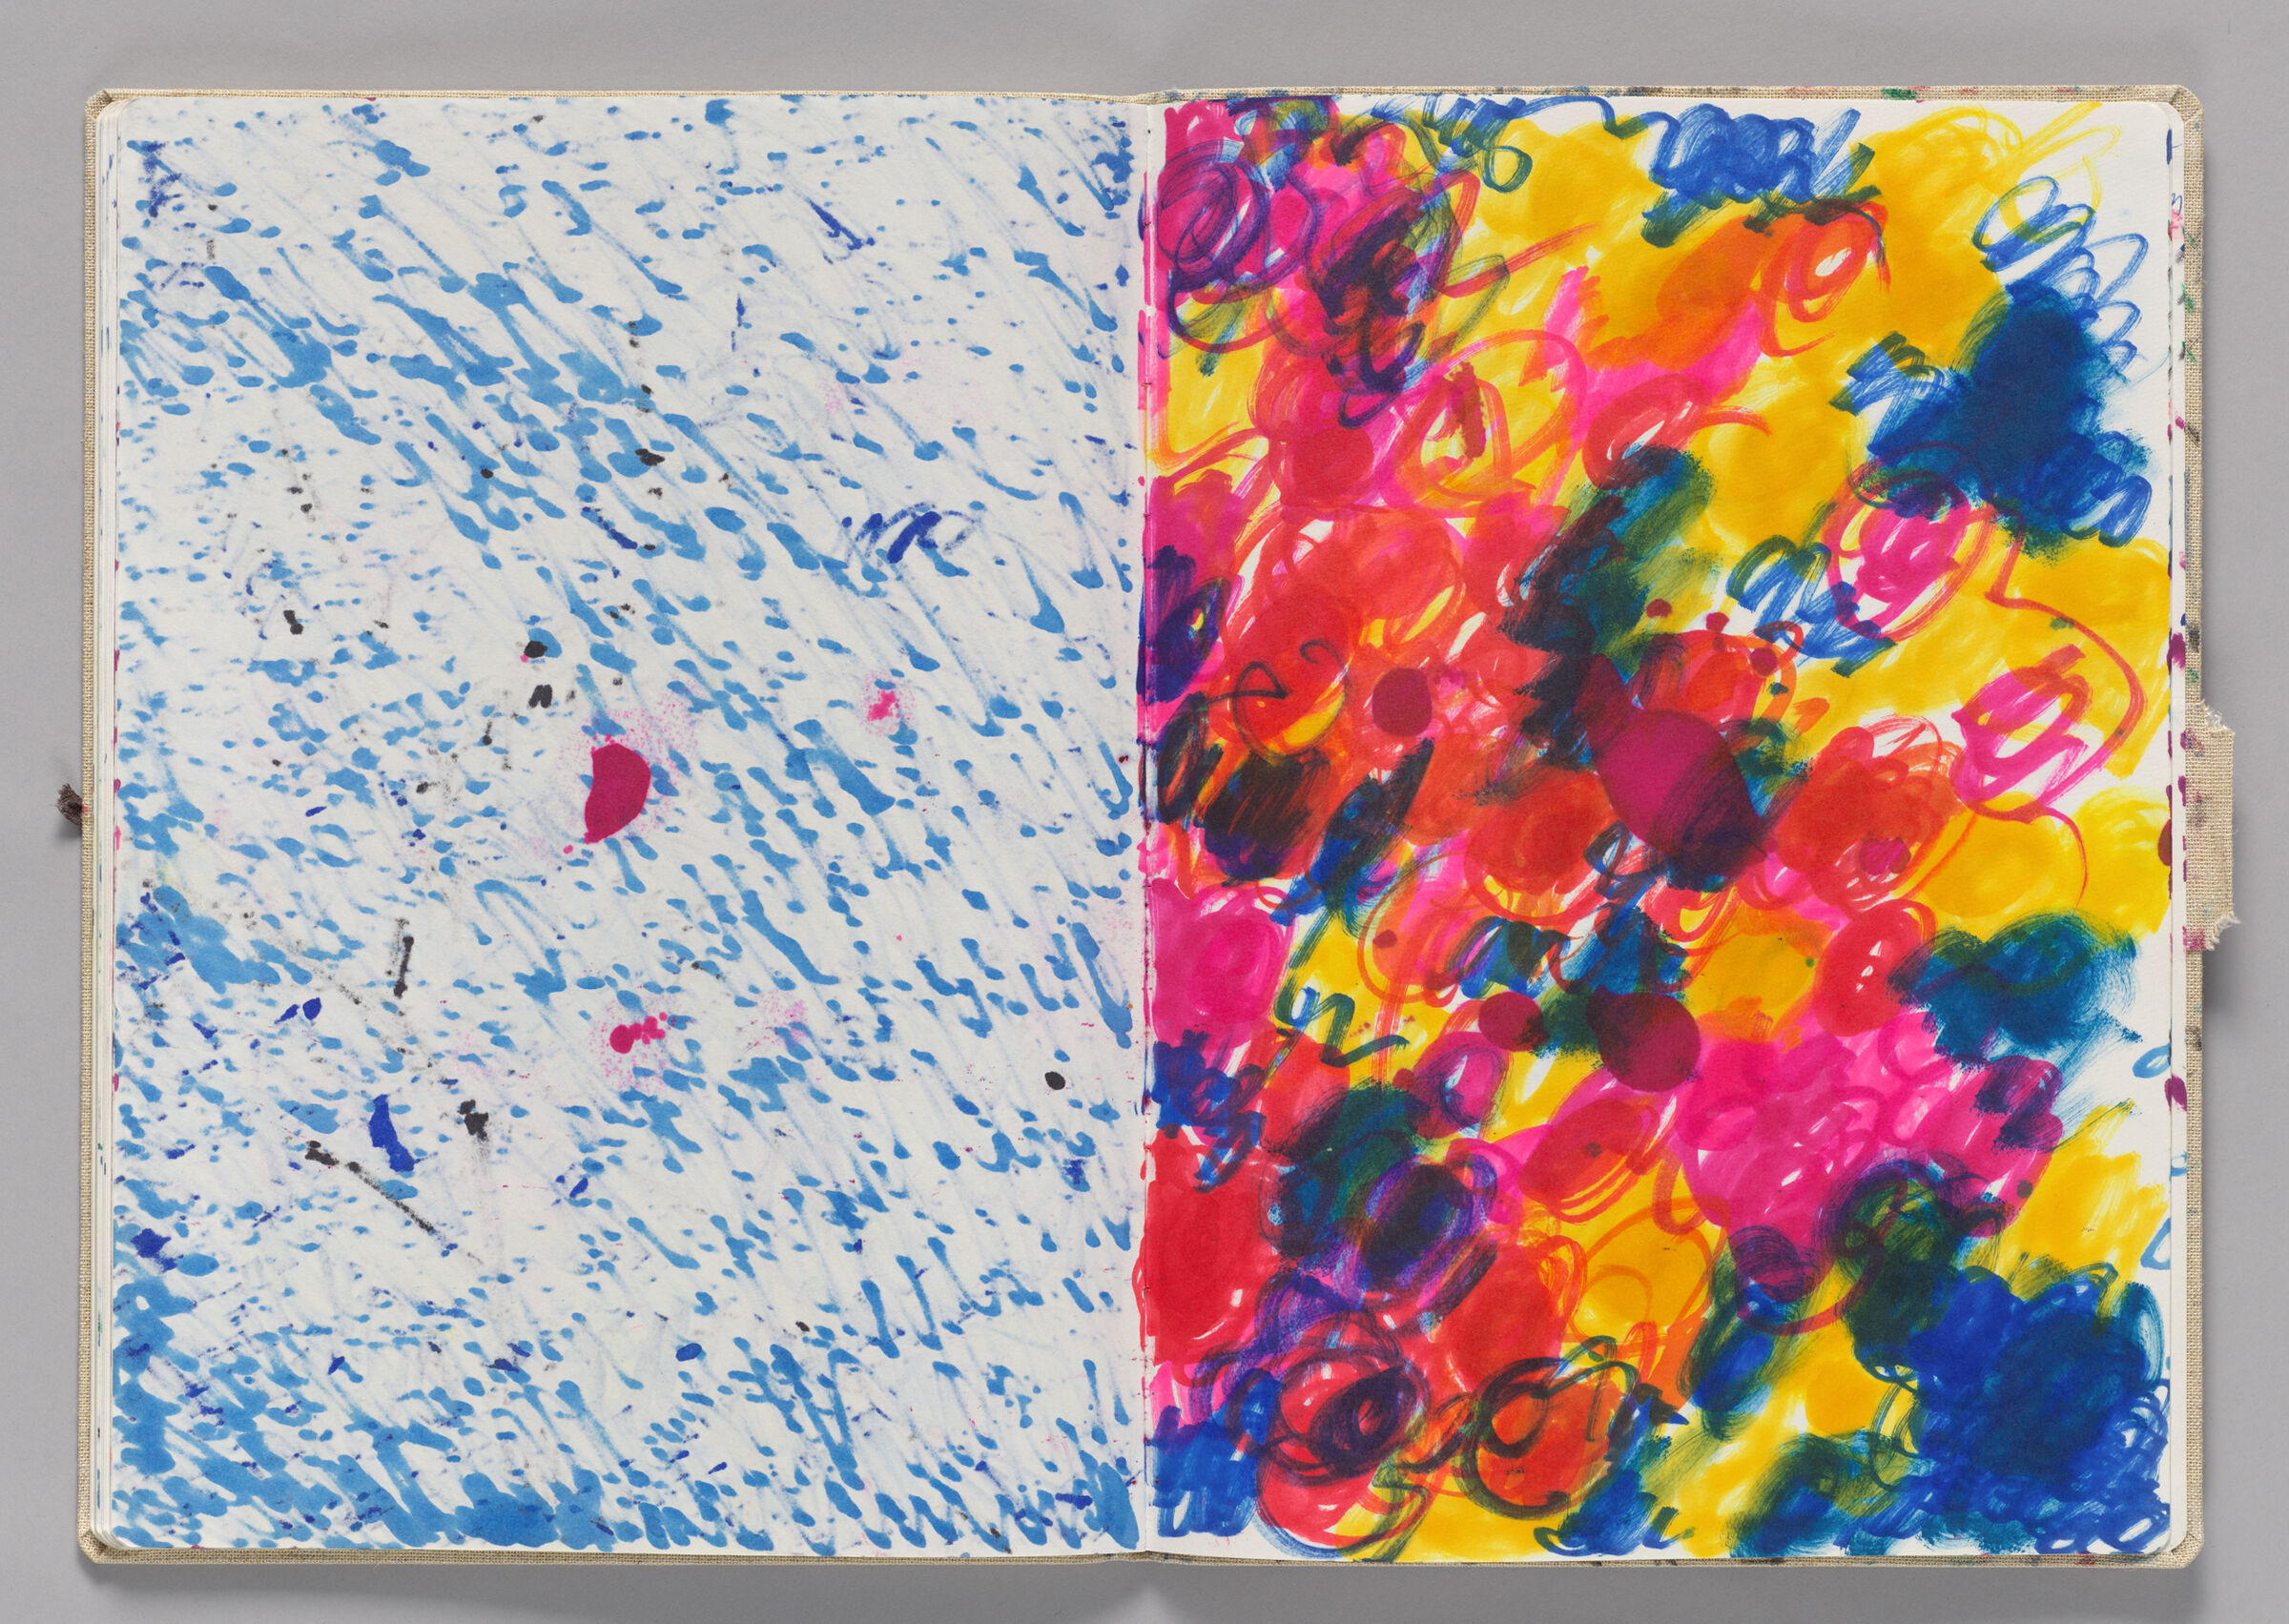 Untitled (Bleed-Through Of Previous Page, Left Page); Untitled (Marker Test, Right Page)